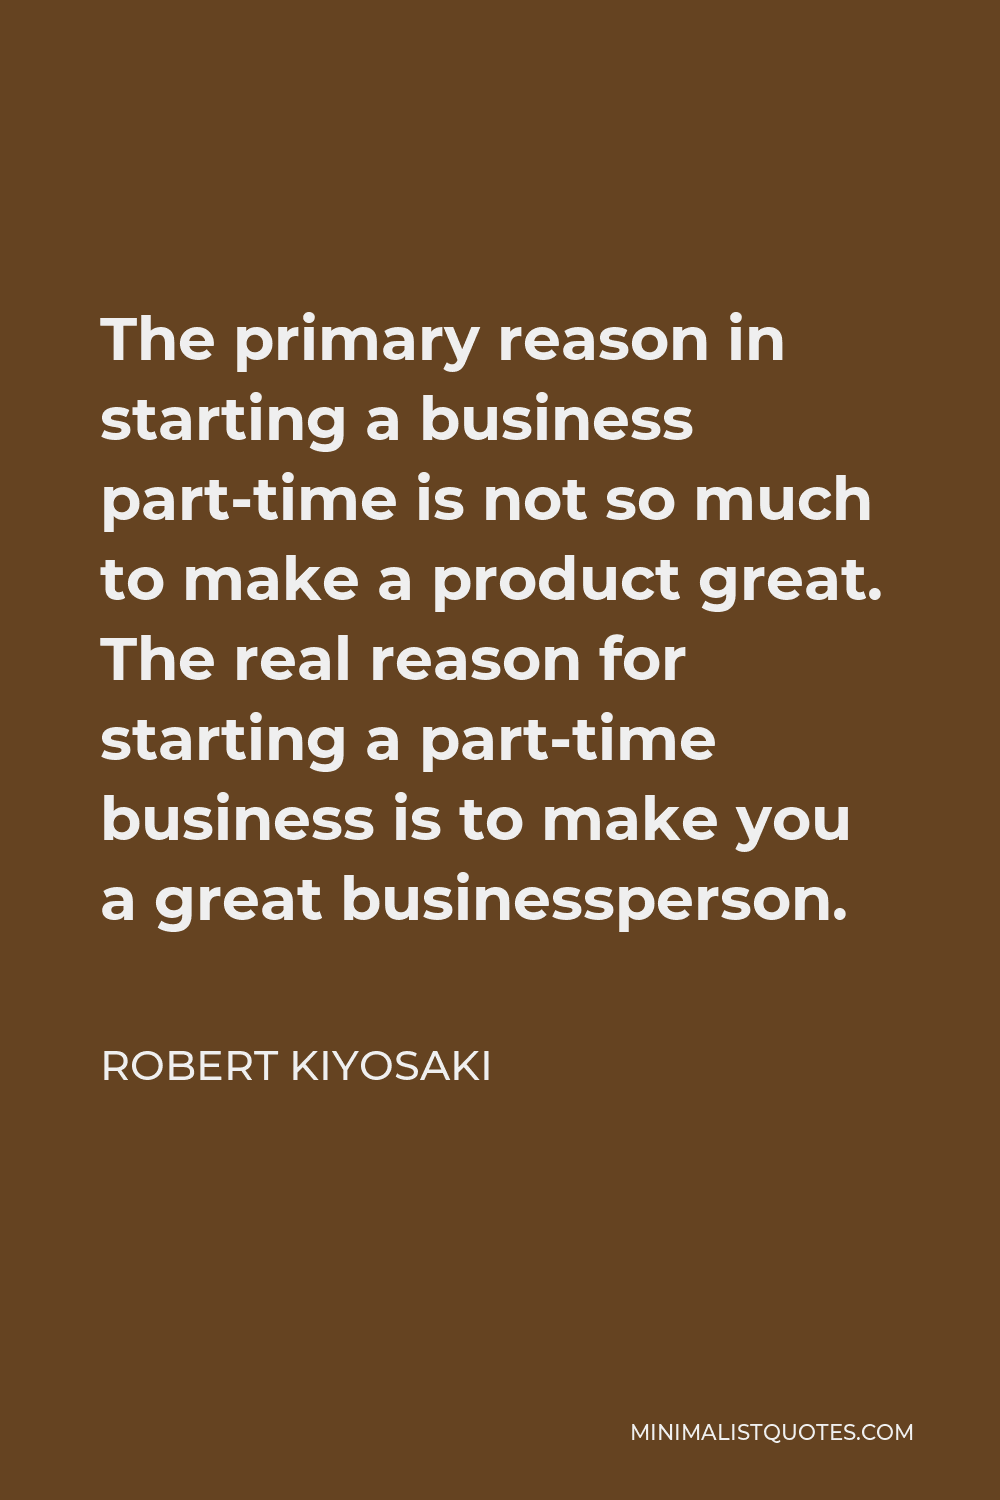 Robert Kiyosaki Quote - The primary reason in starting a business part-time is not so much to make a product great. The real reason for starting a part-time business is to make you a great businessperson.